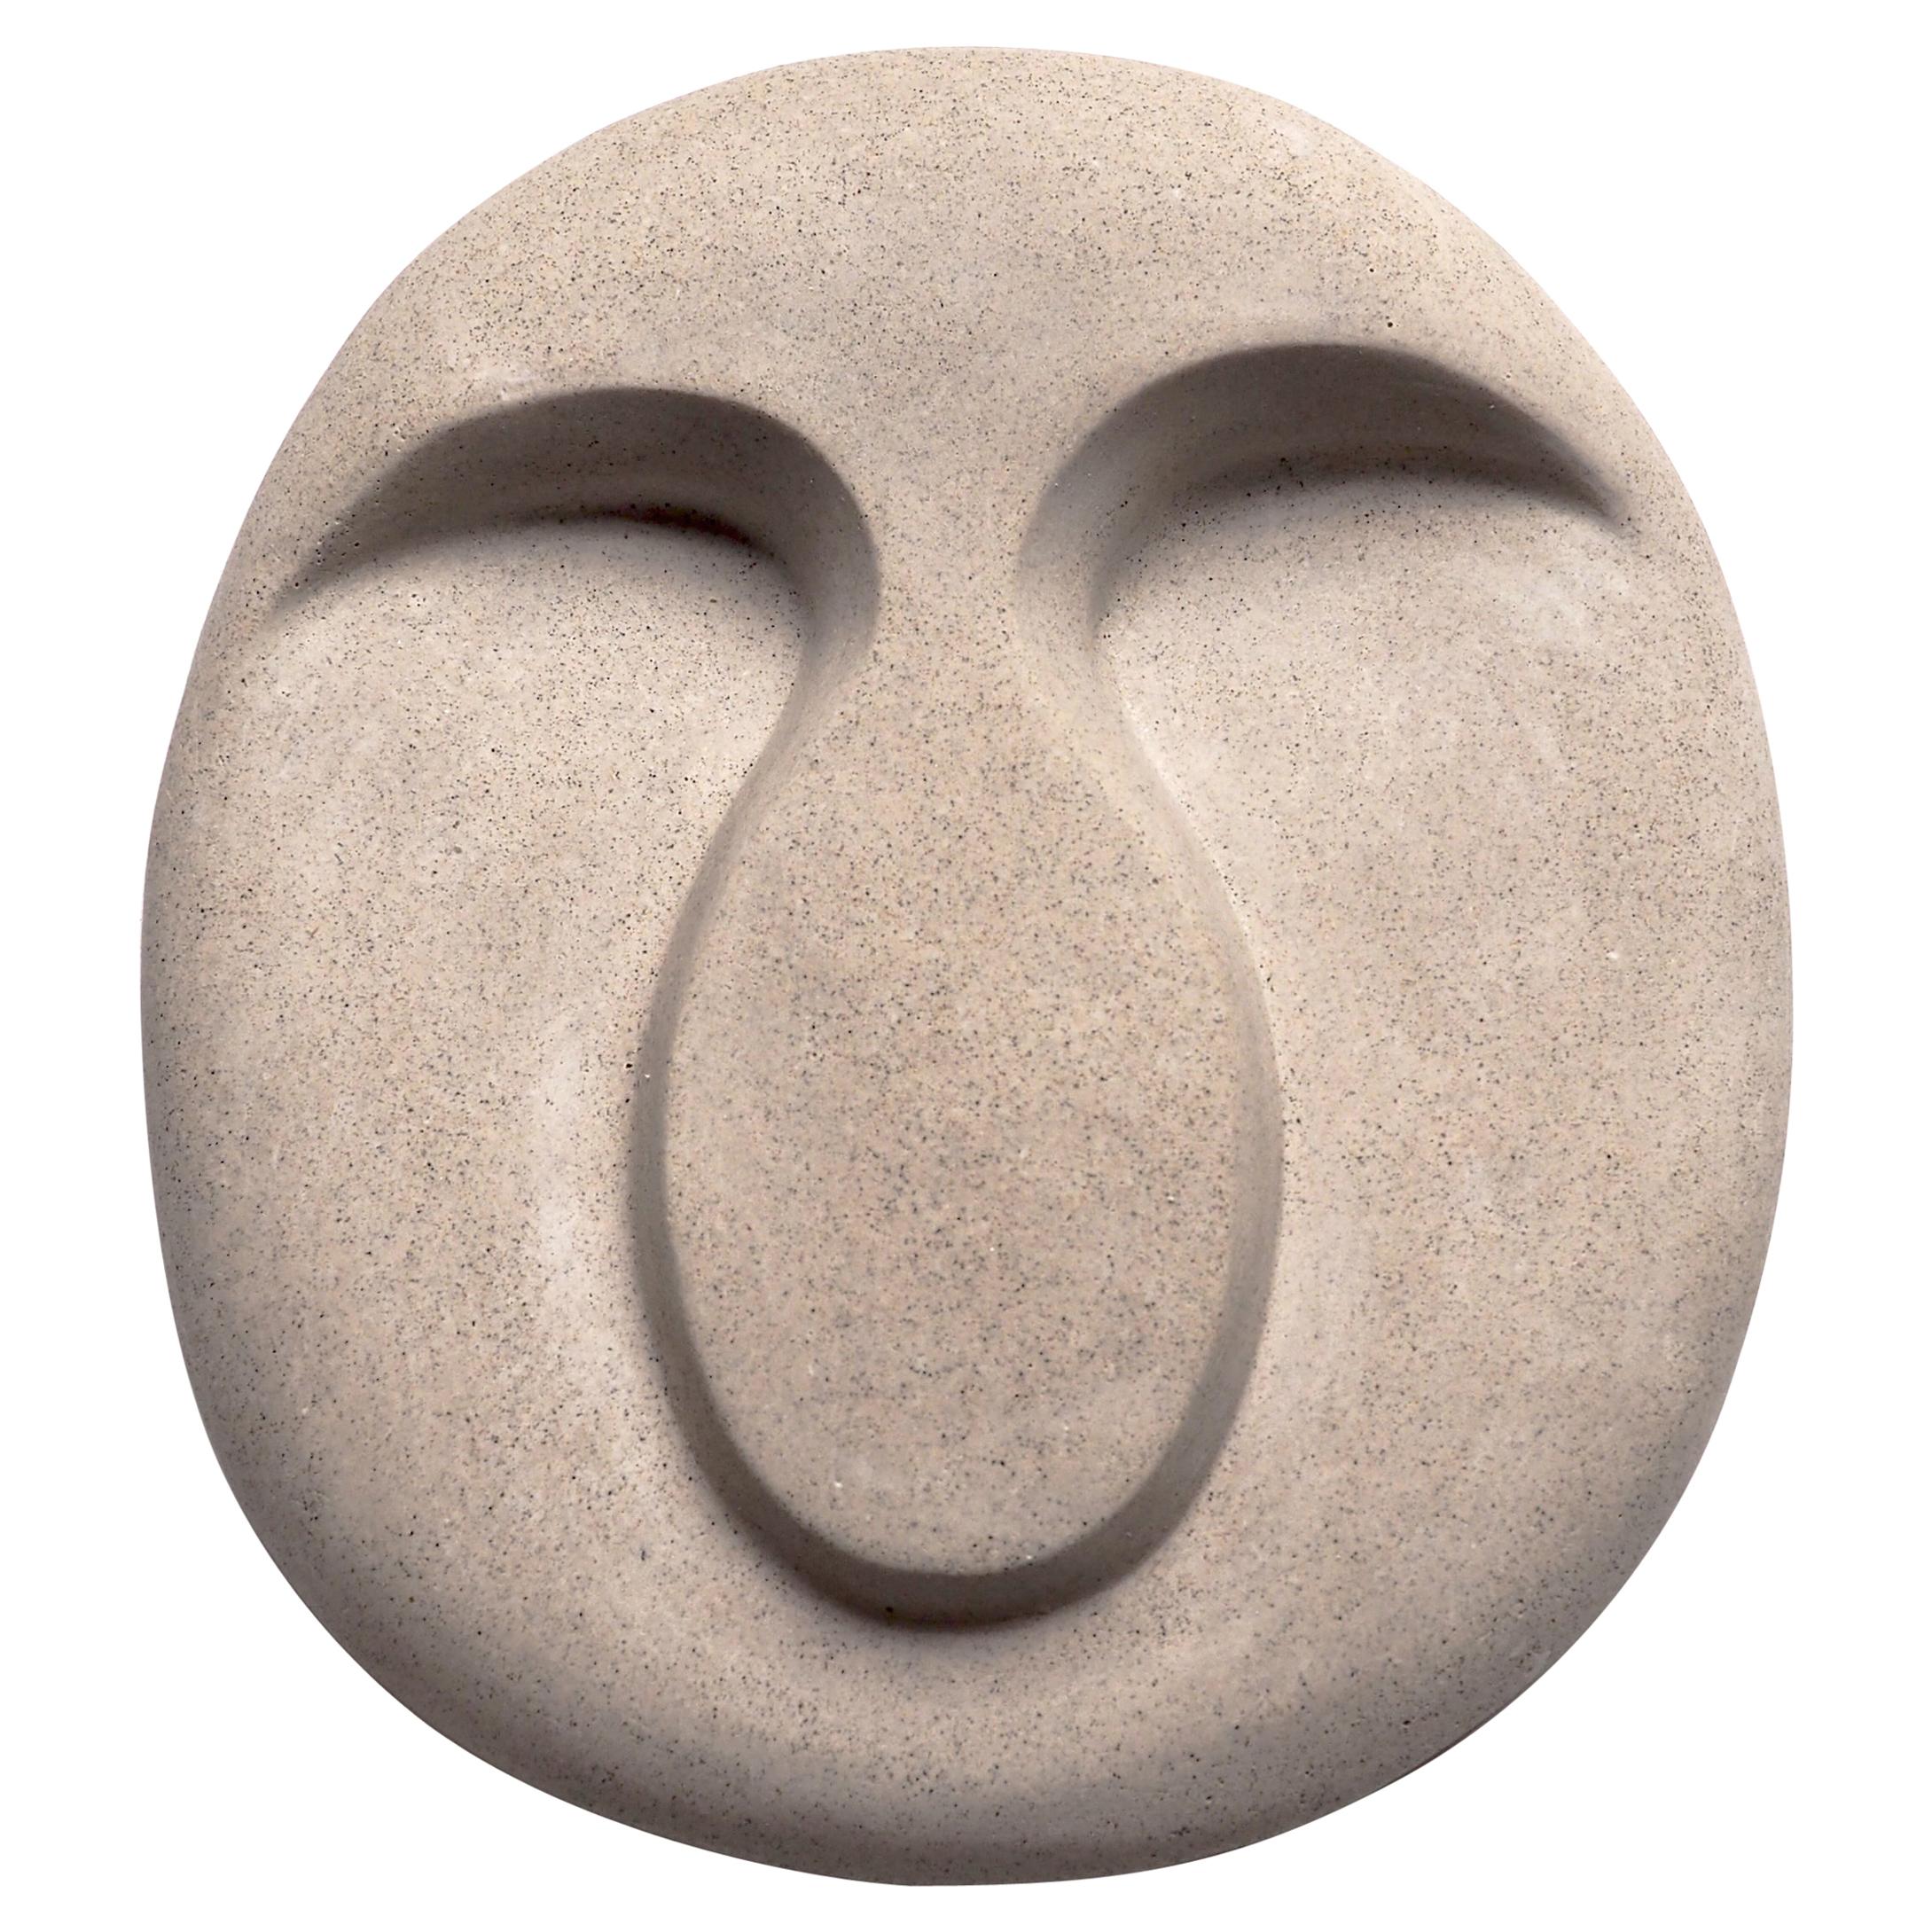 Idoli Mask Plaster Wall Sculpture For Sale